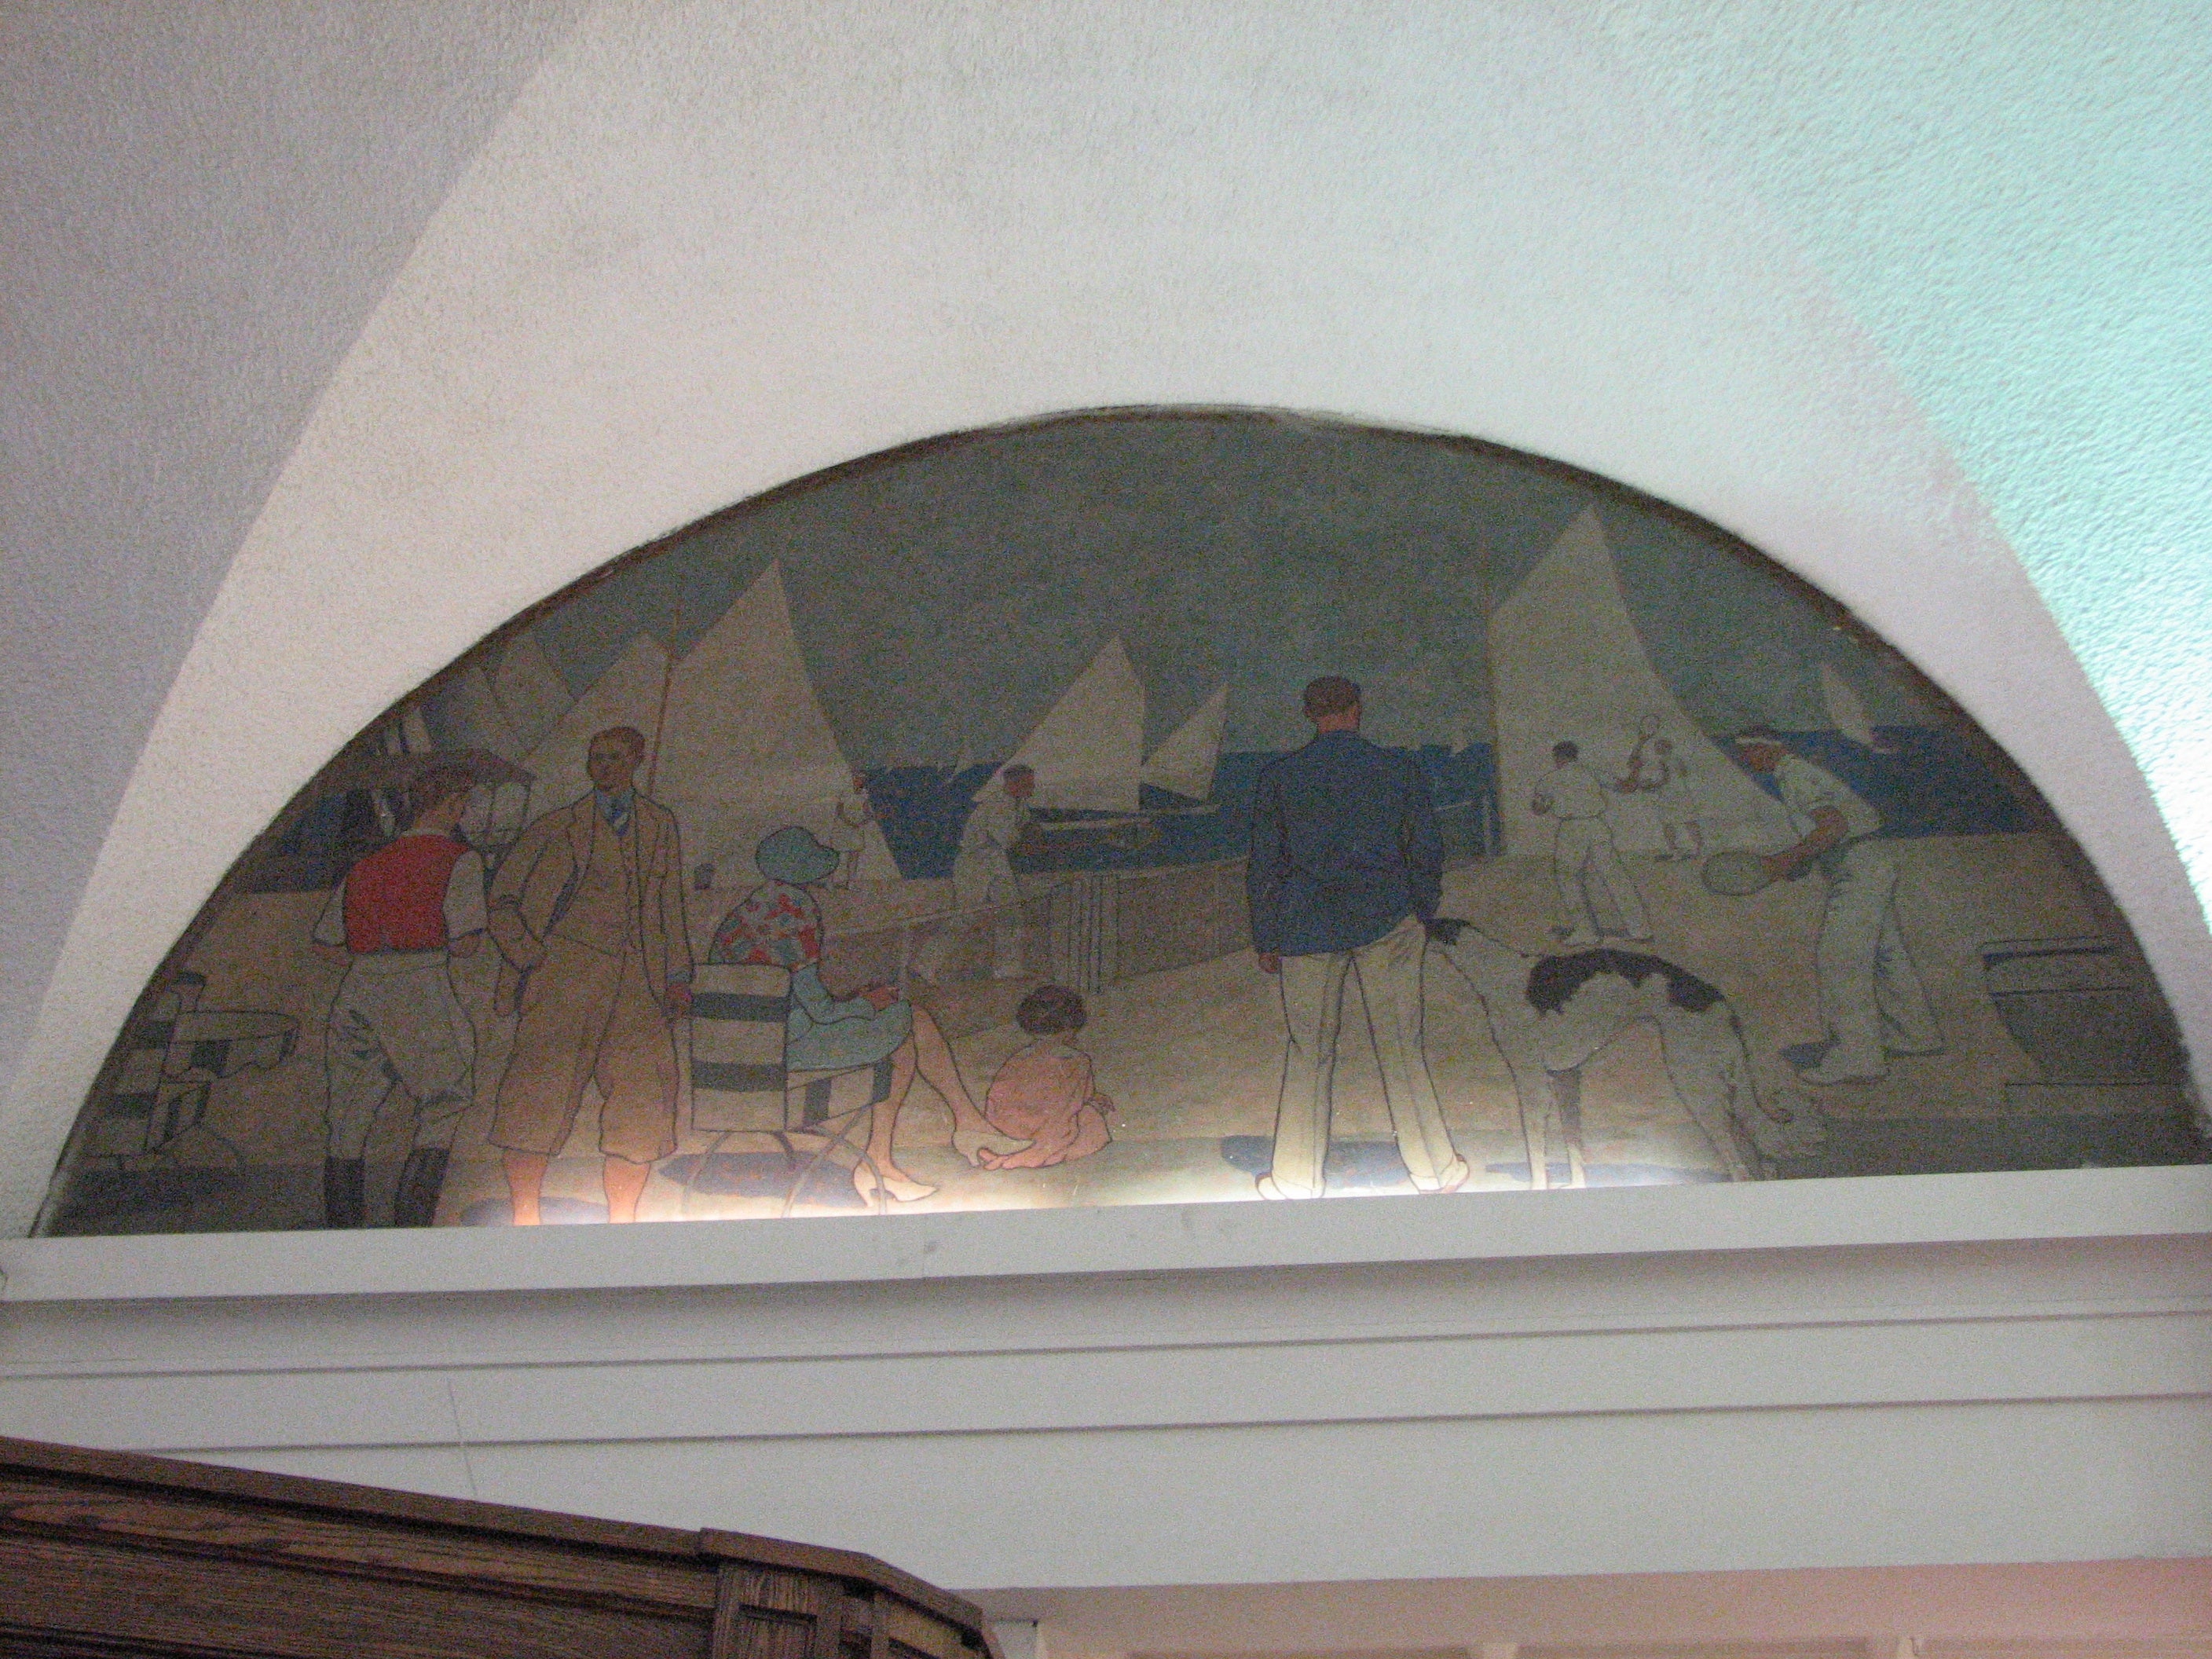 Murals of fashionably dressed young families have survived the building's many occupants.